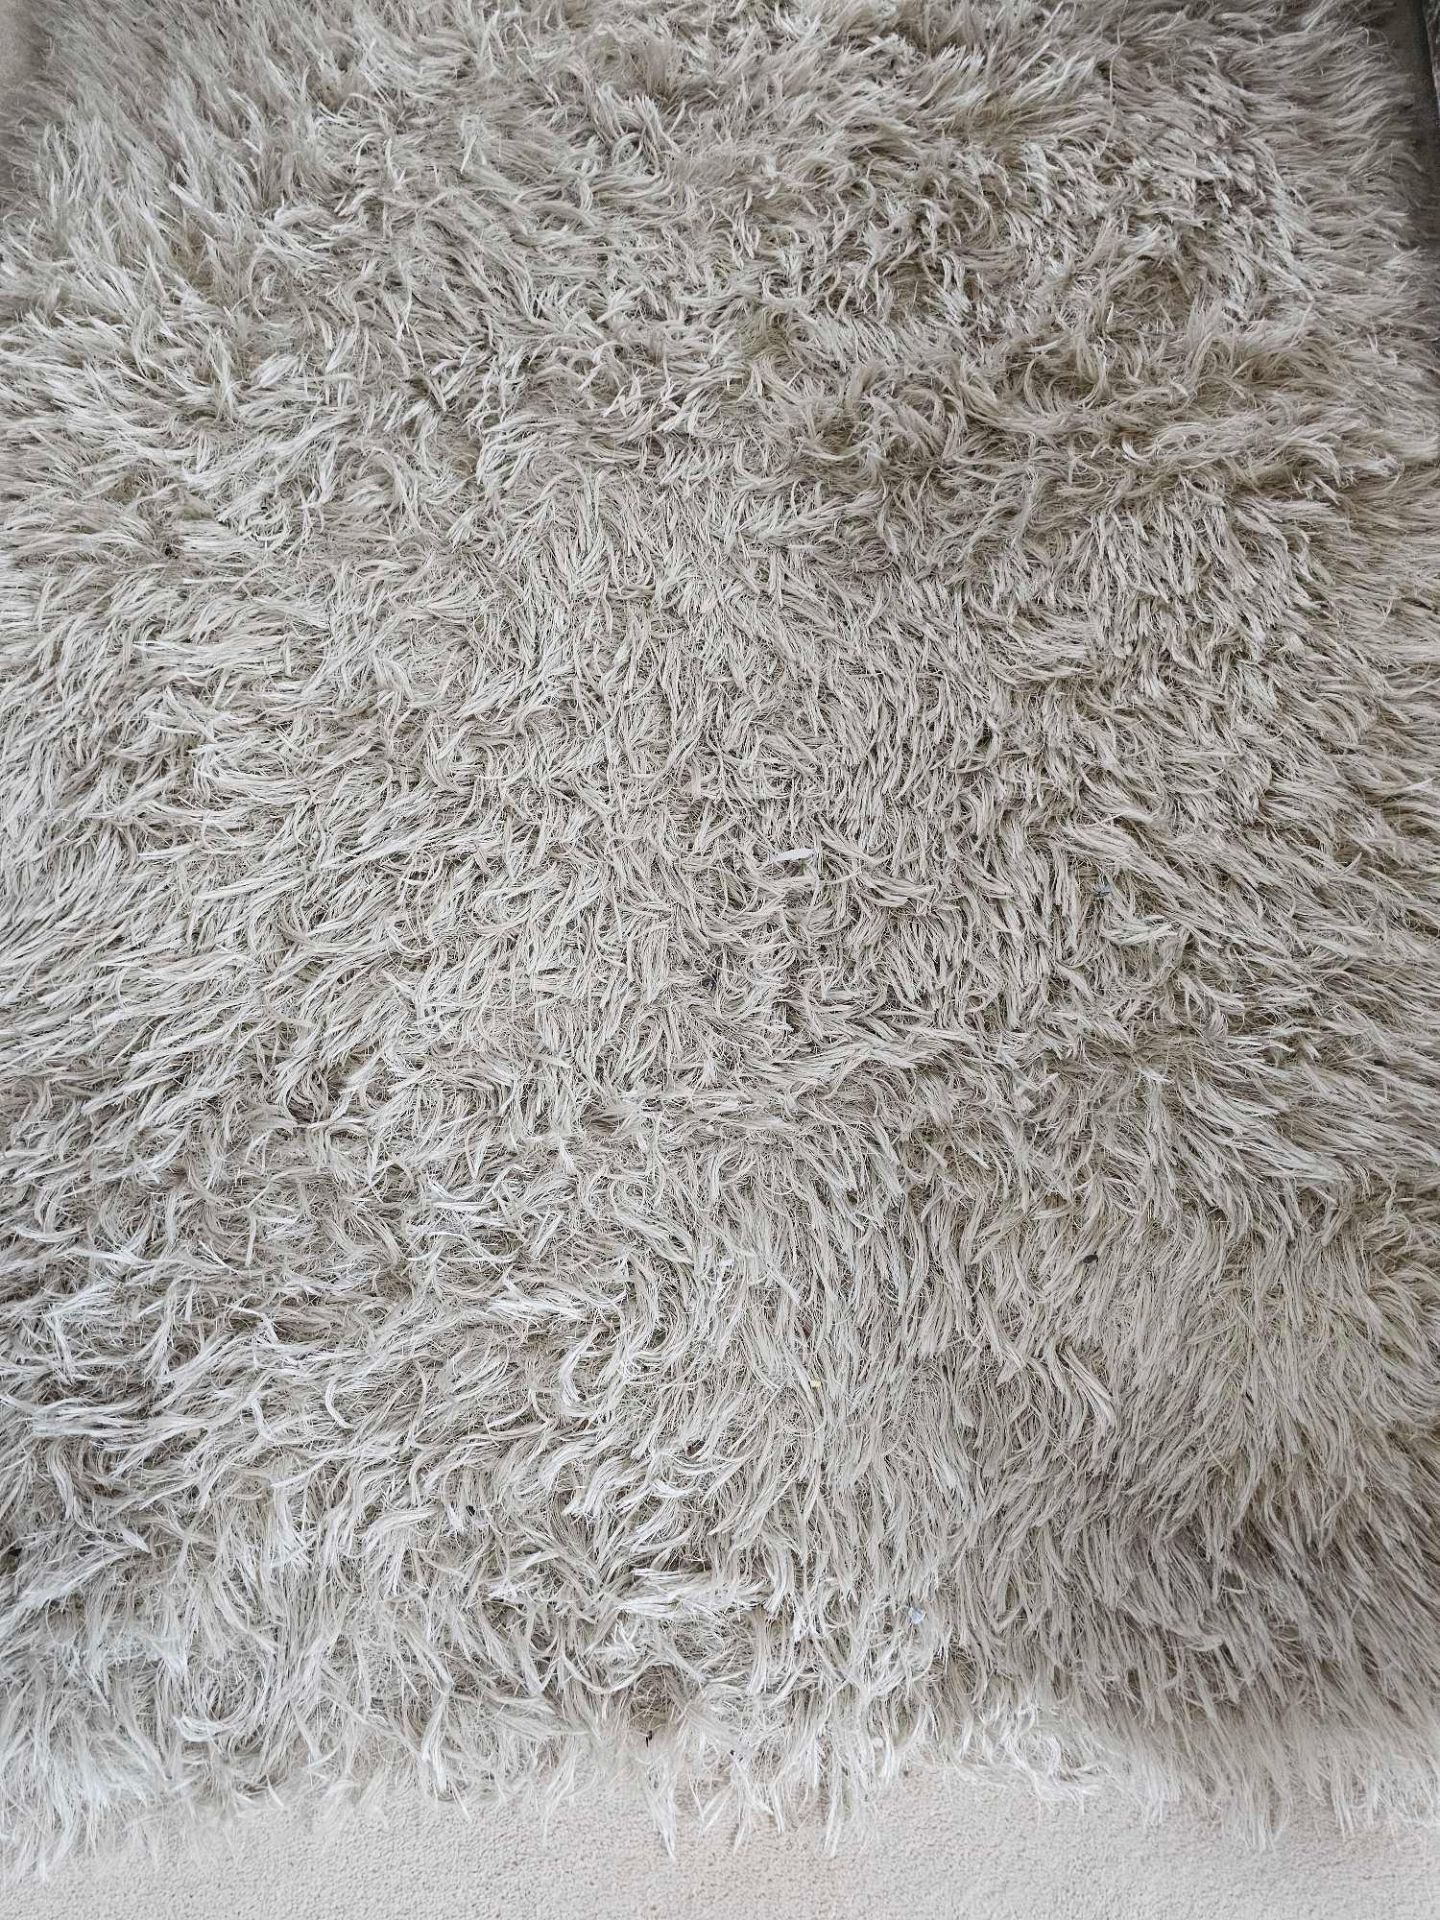 A Glitz Soft Pile Polyester Silver Rug 118 X 120cm - Image 4 of 4